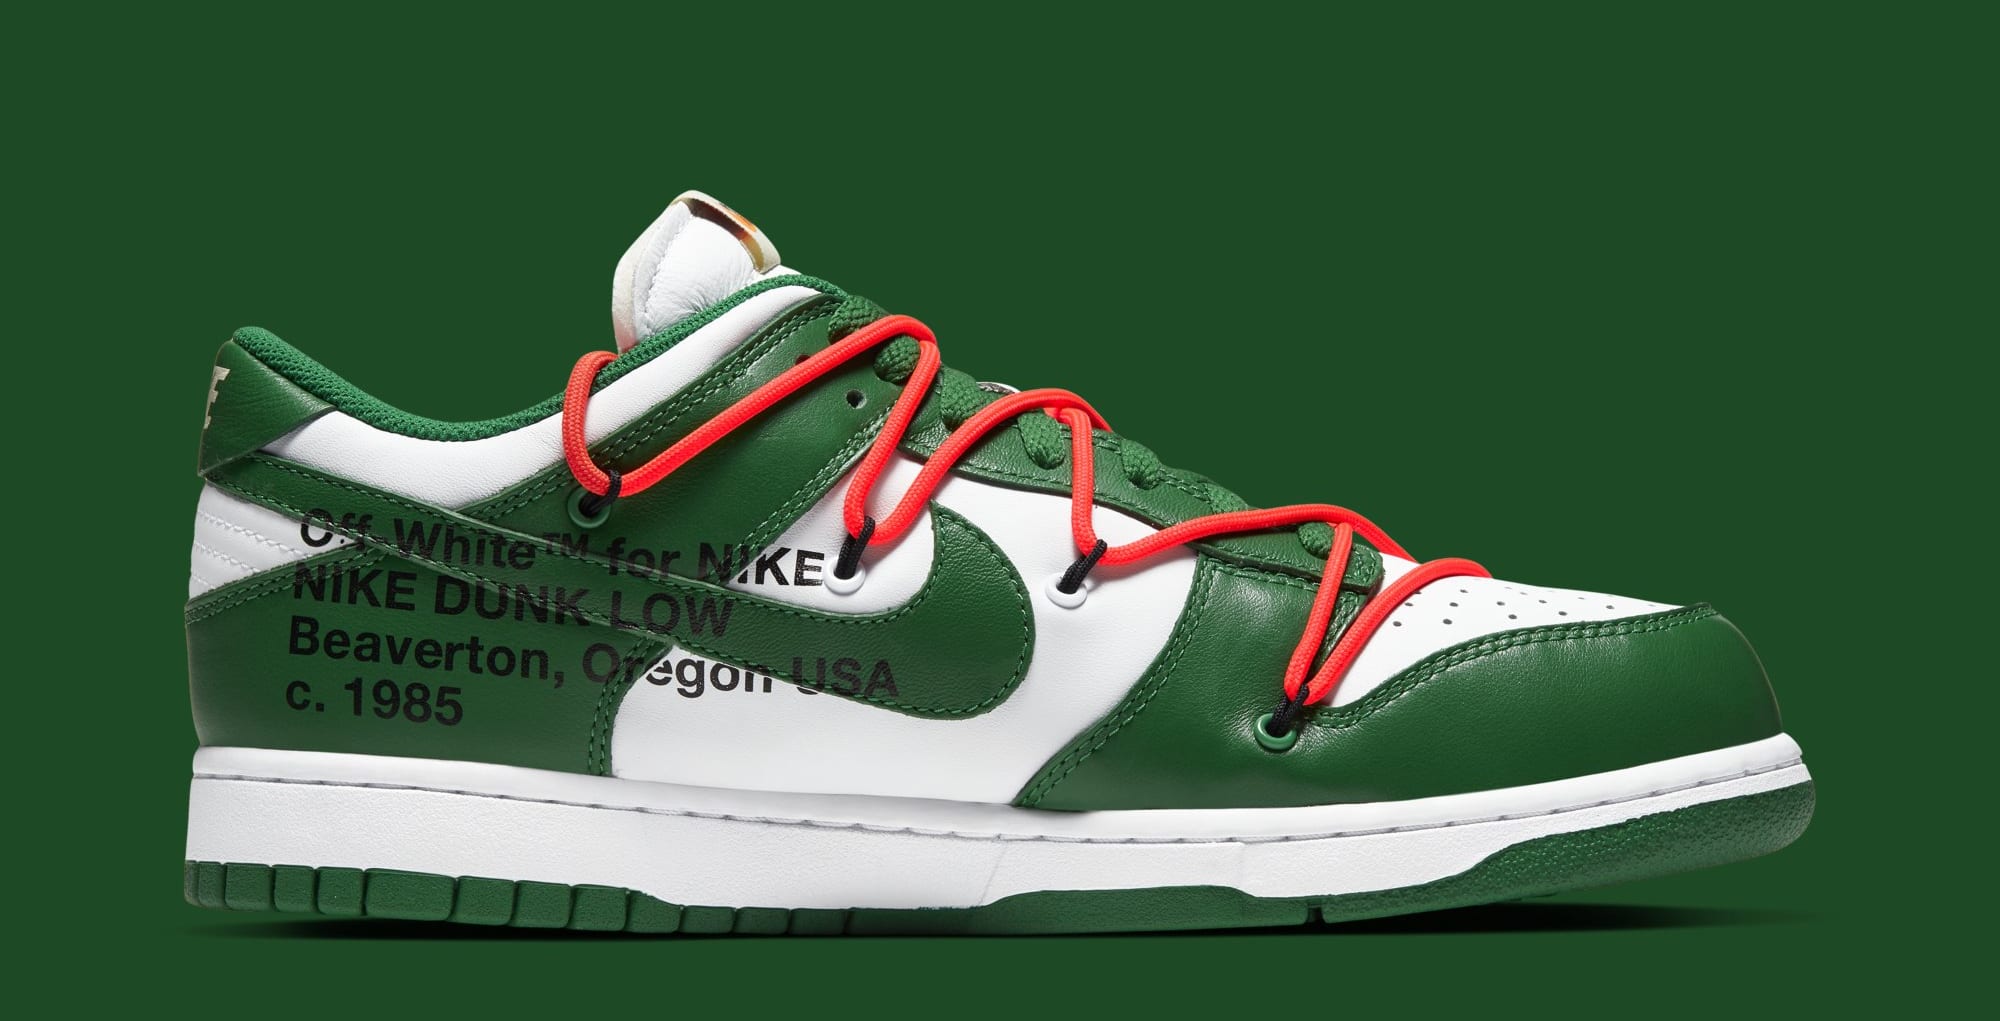 Look Yet at the Off-White x Nike Dunks |